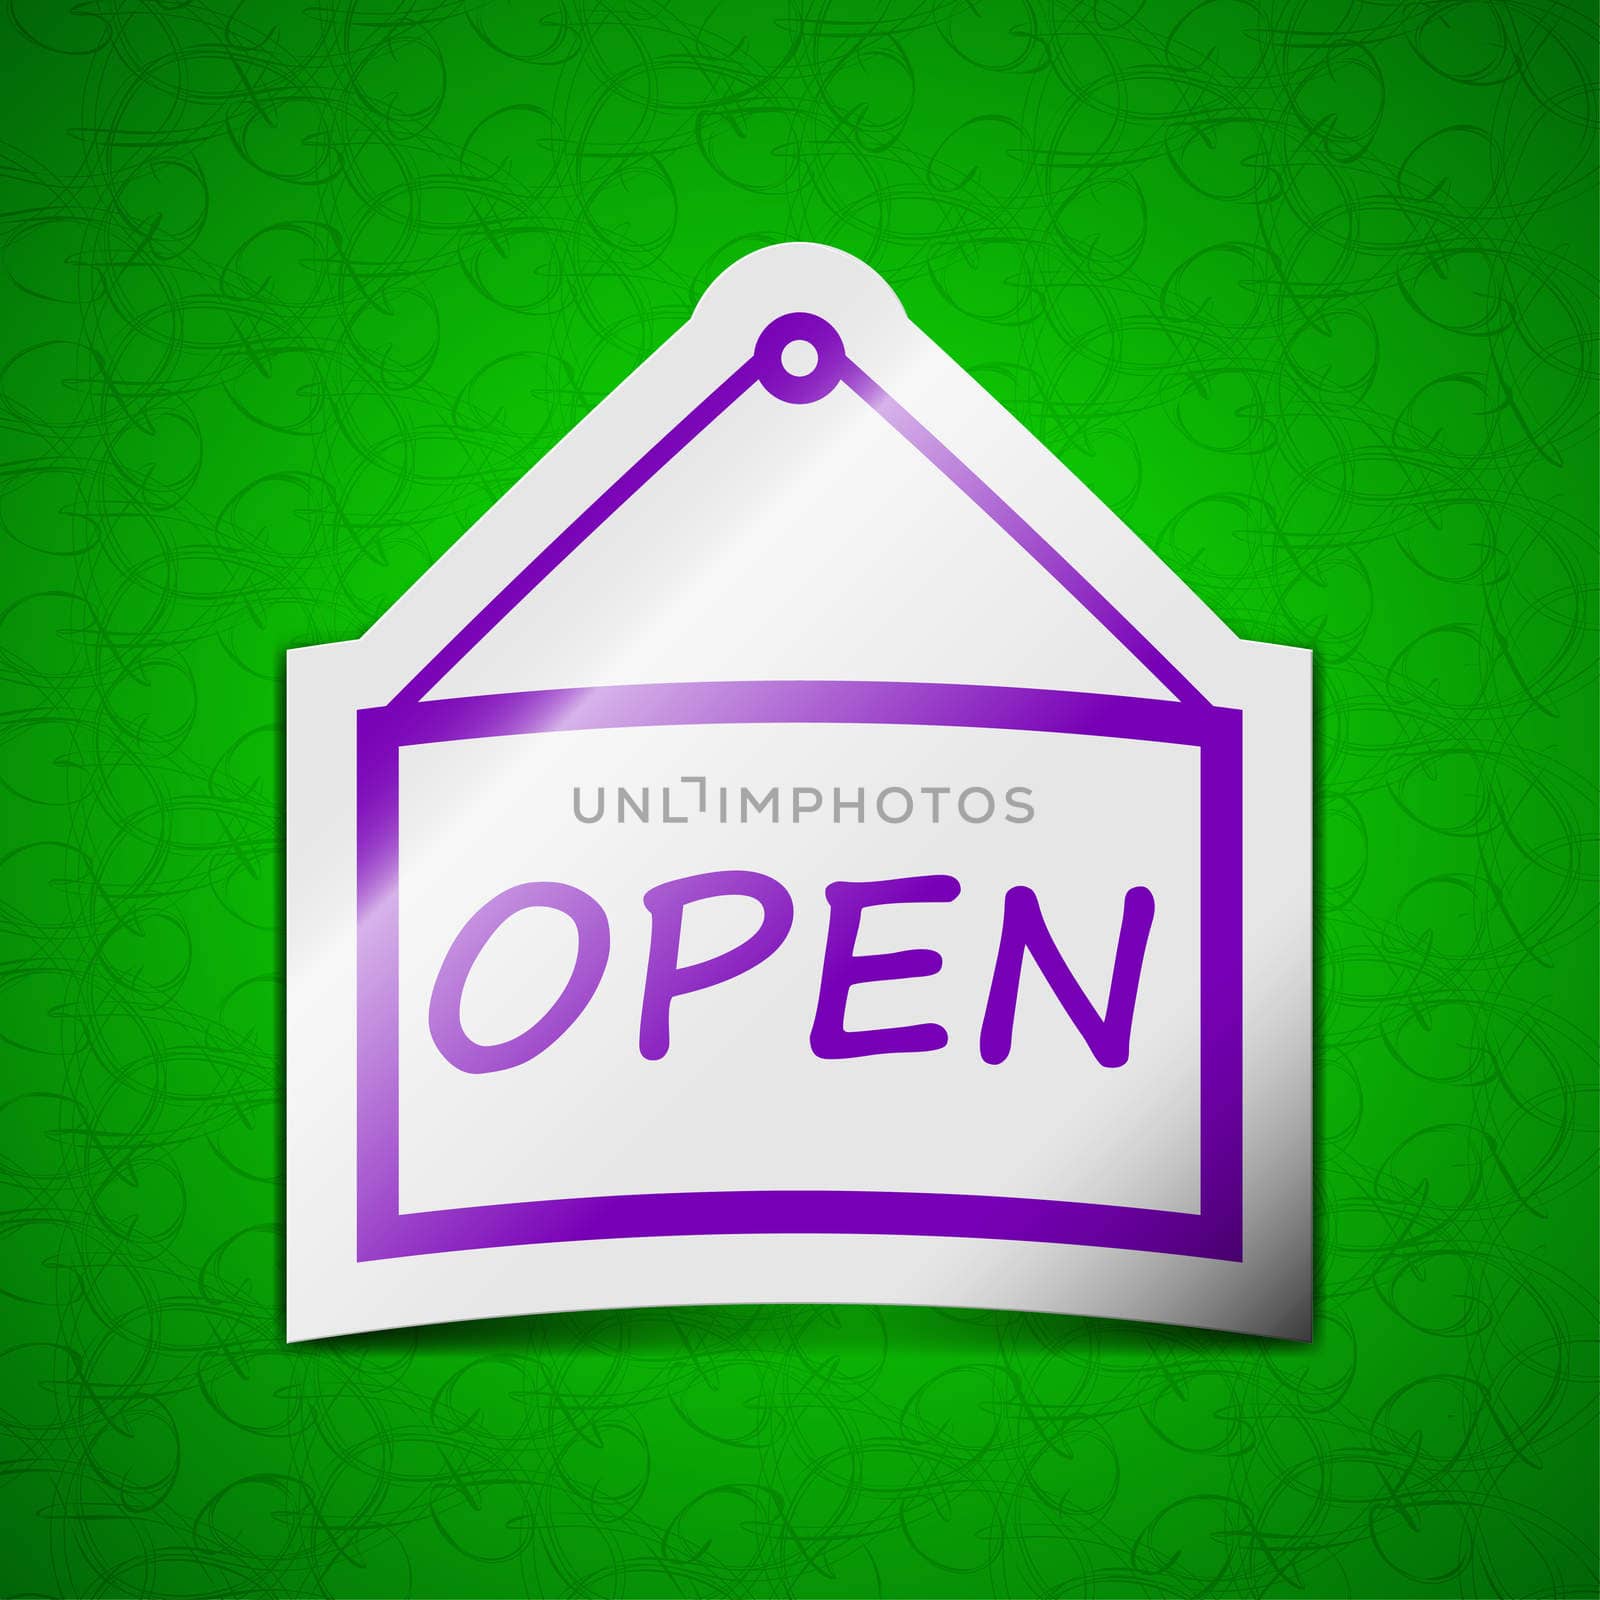 open icon sign. Symbol chic colored sticky label on green background. illustration